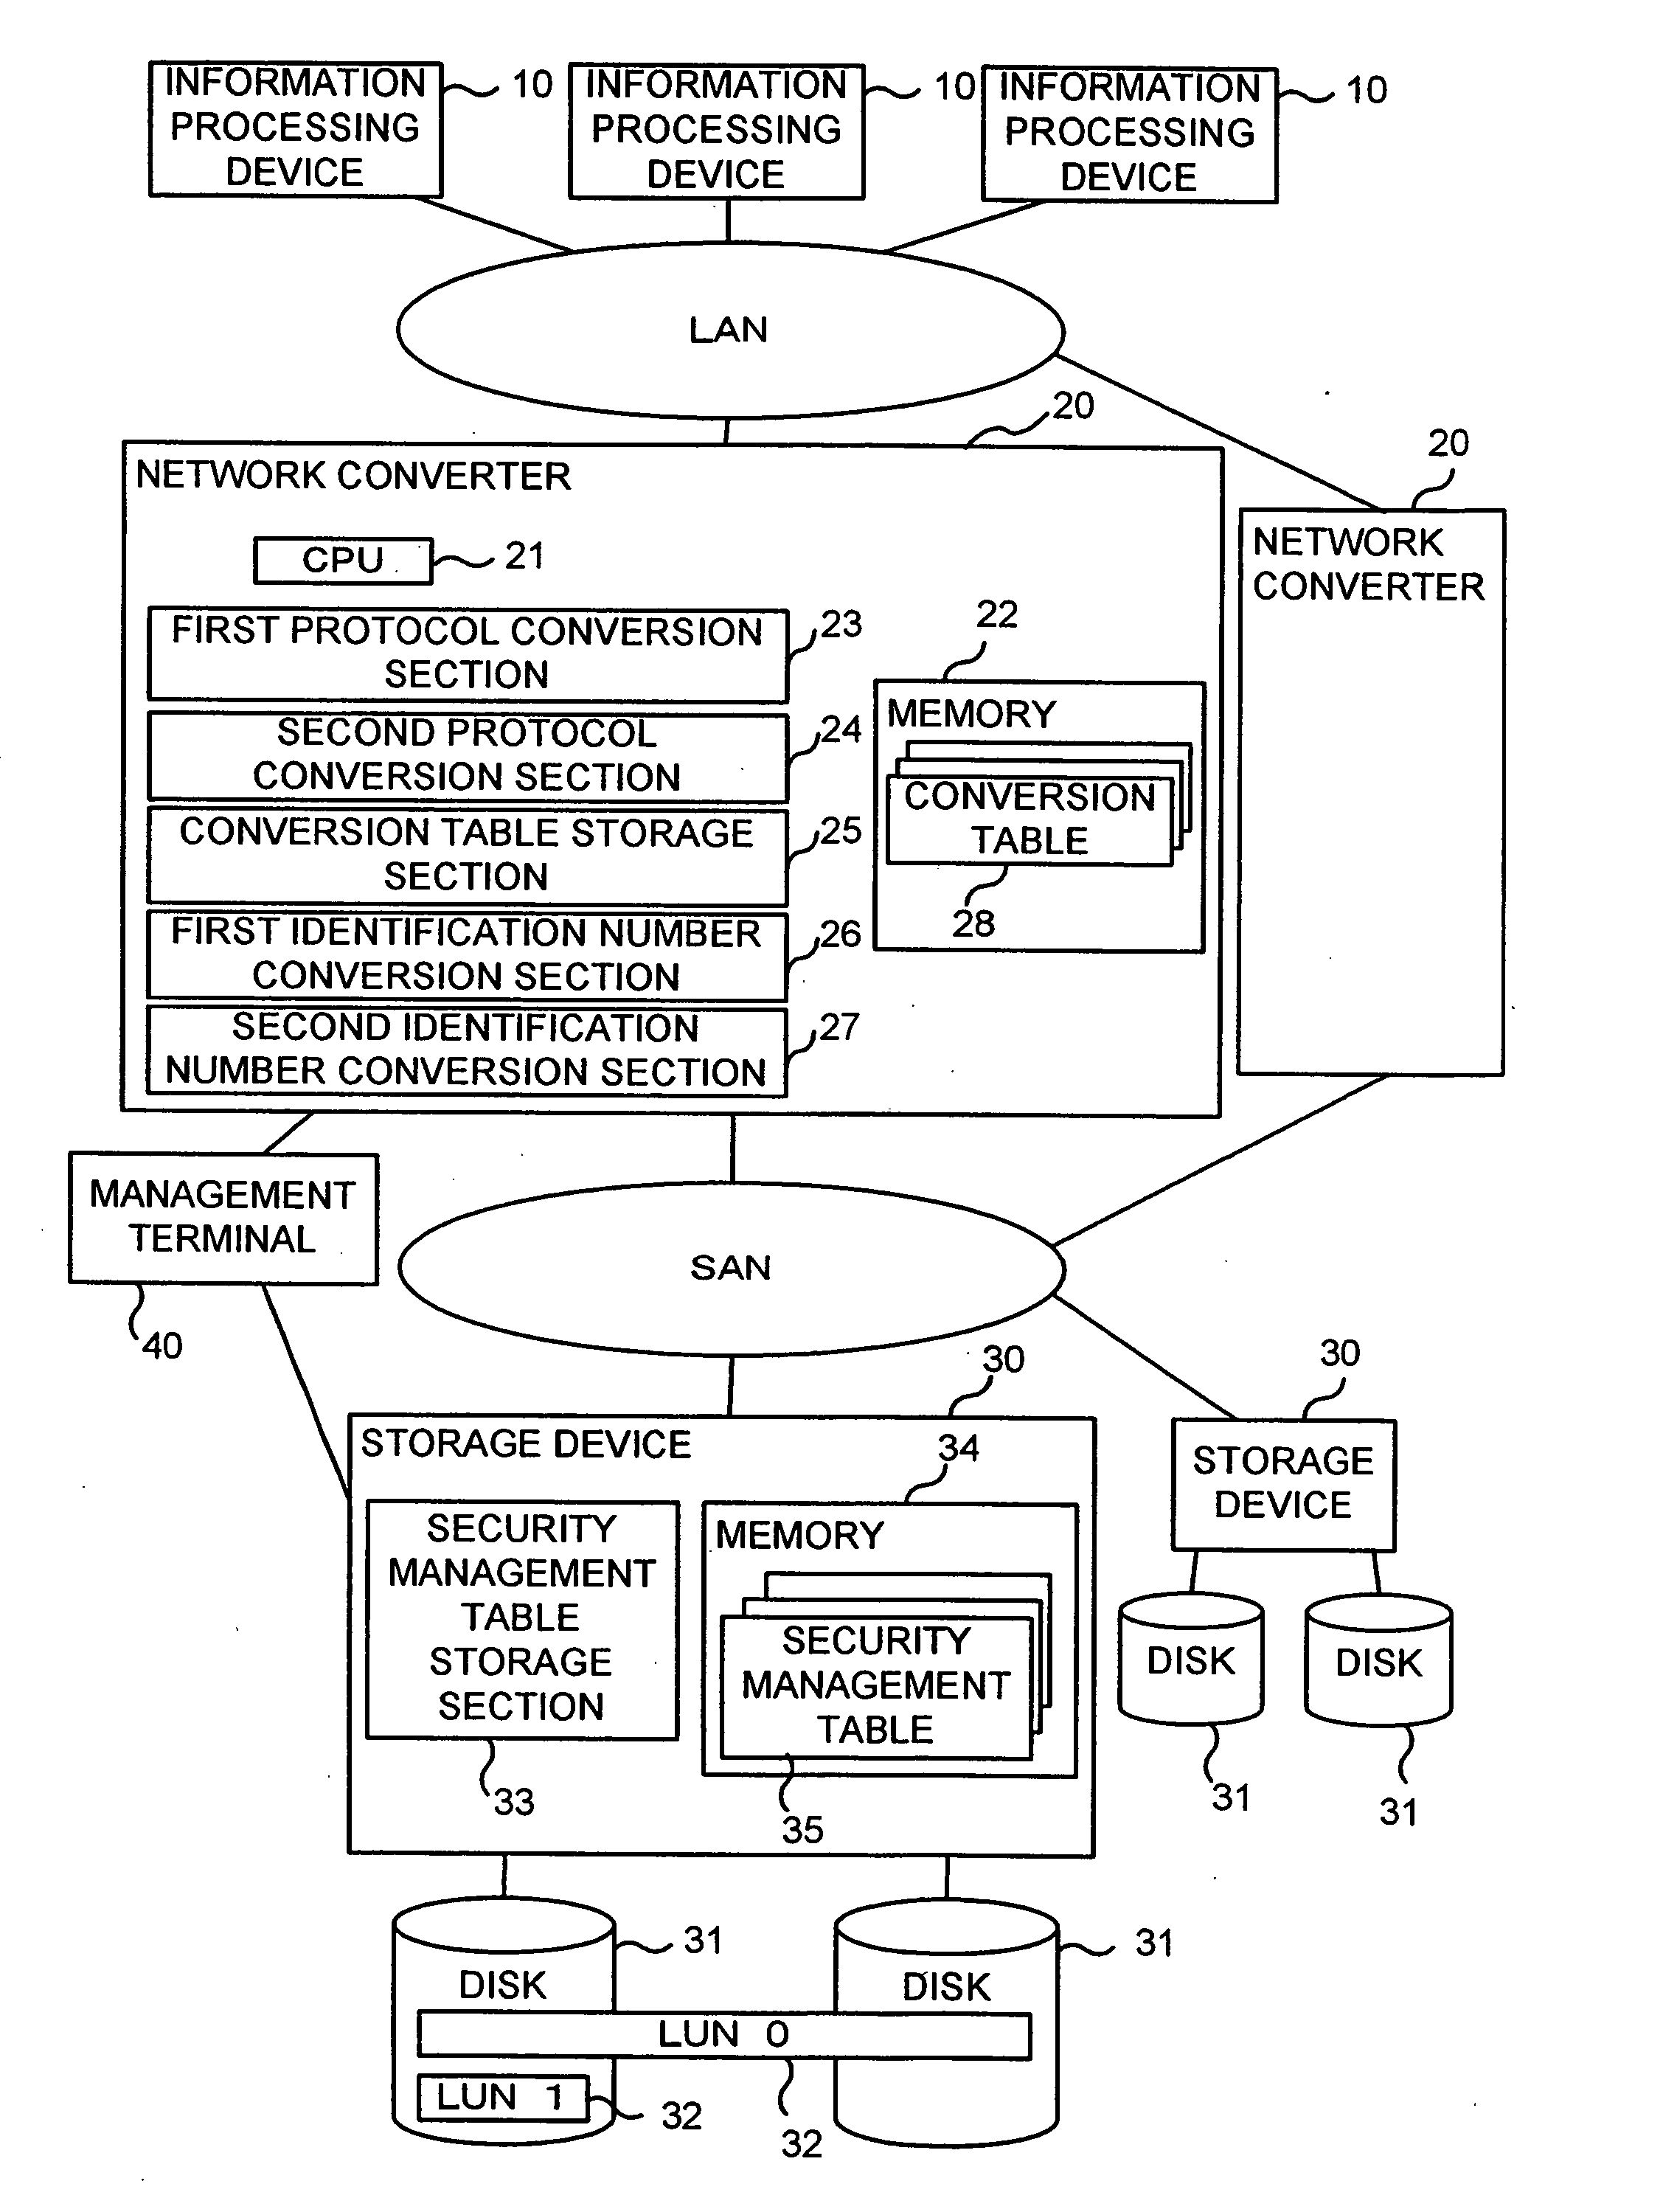 Network converter and information processing system